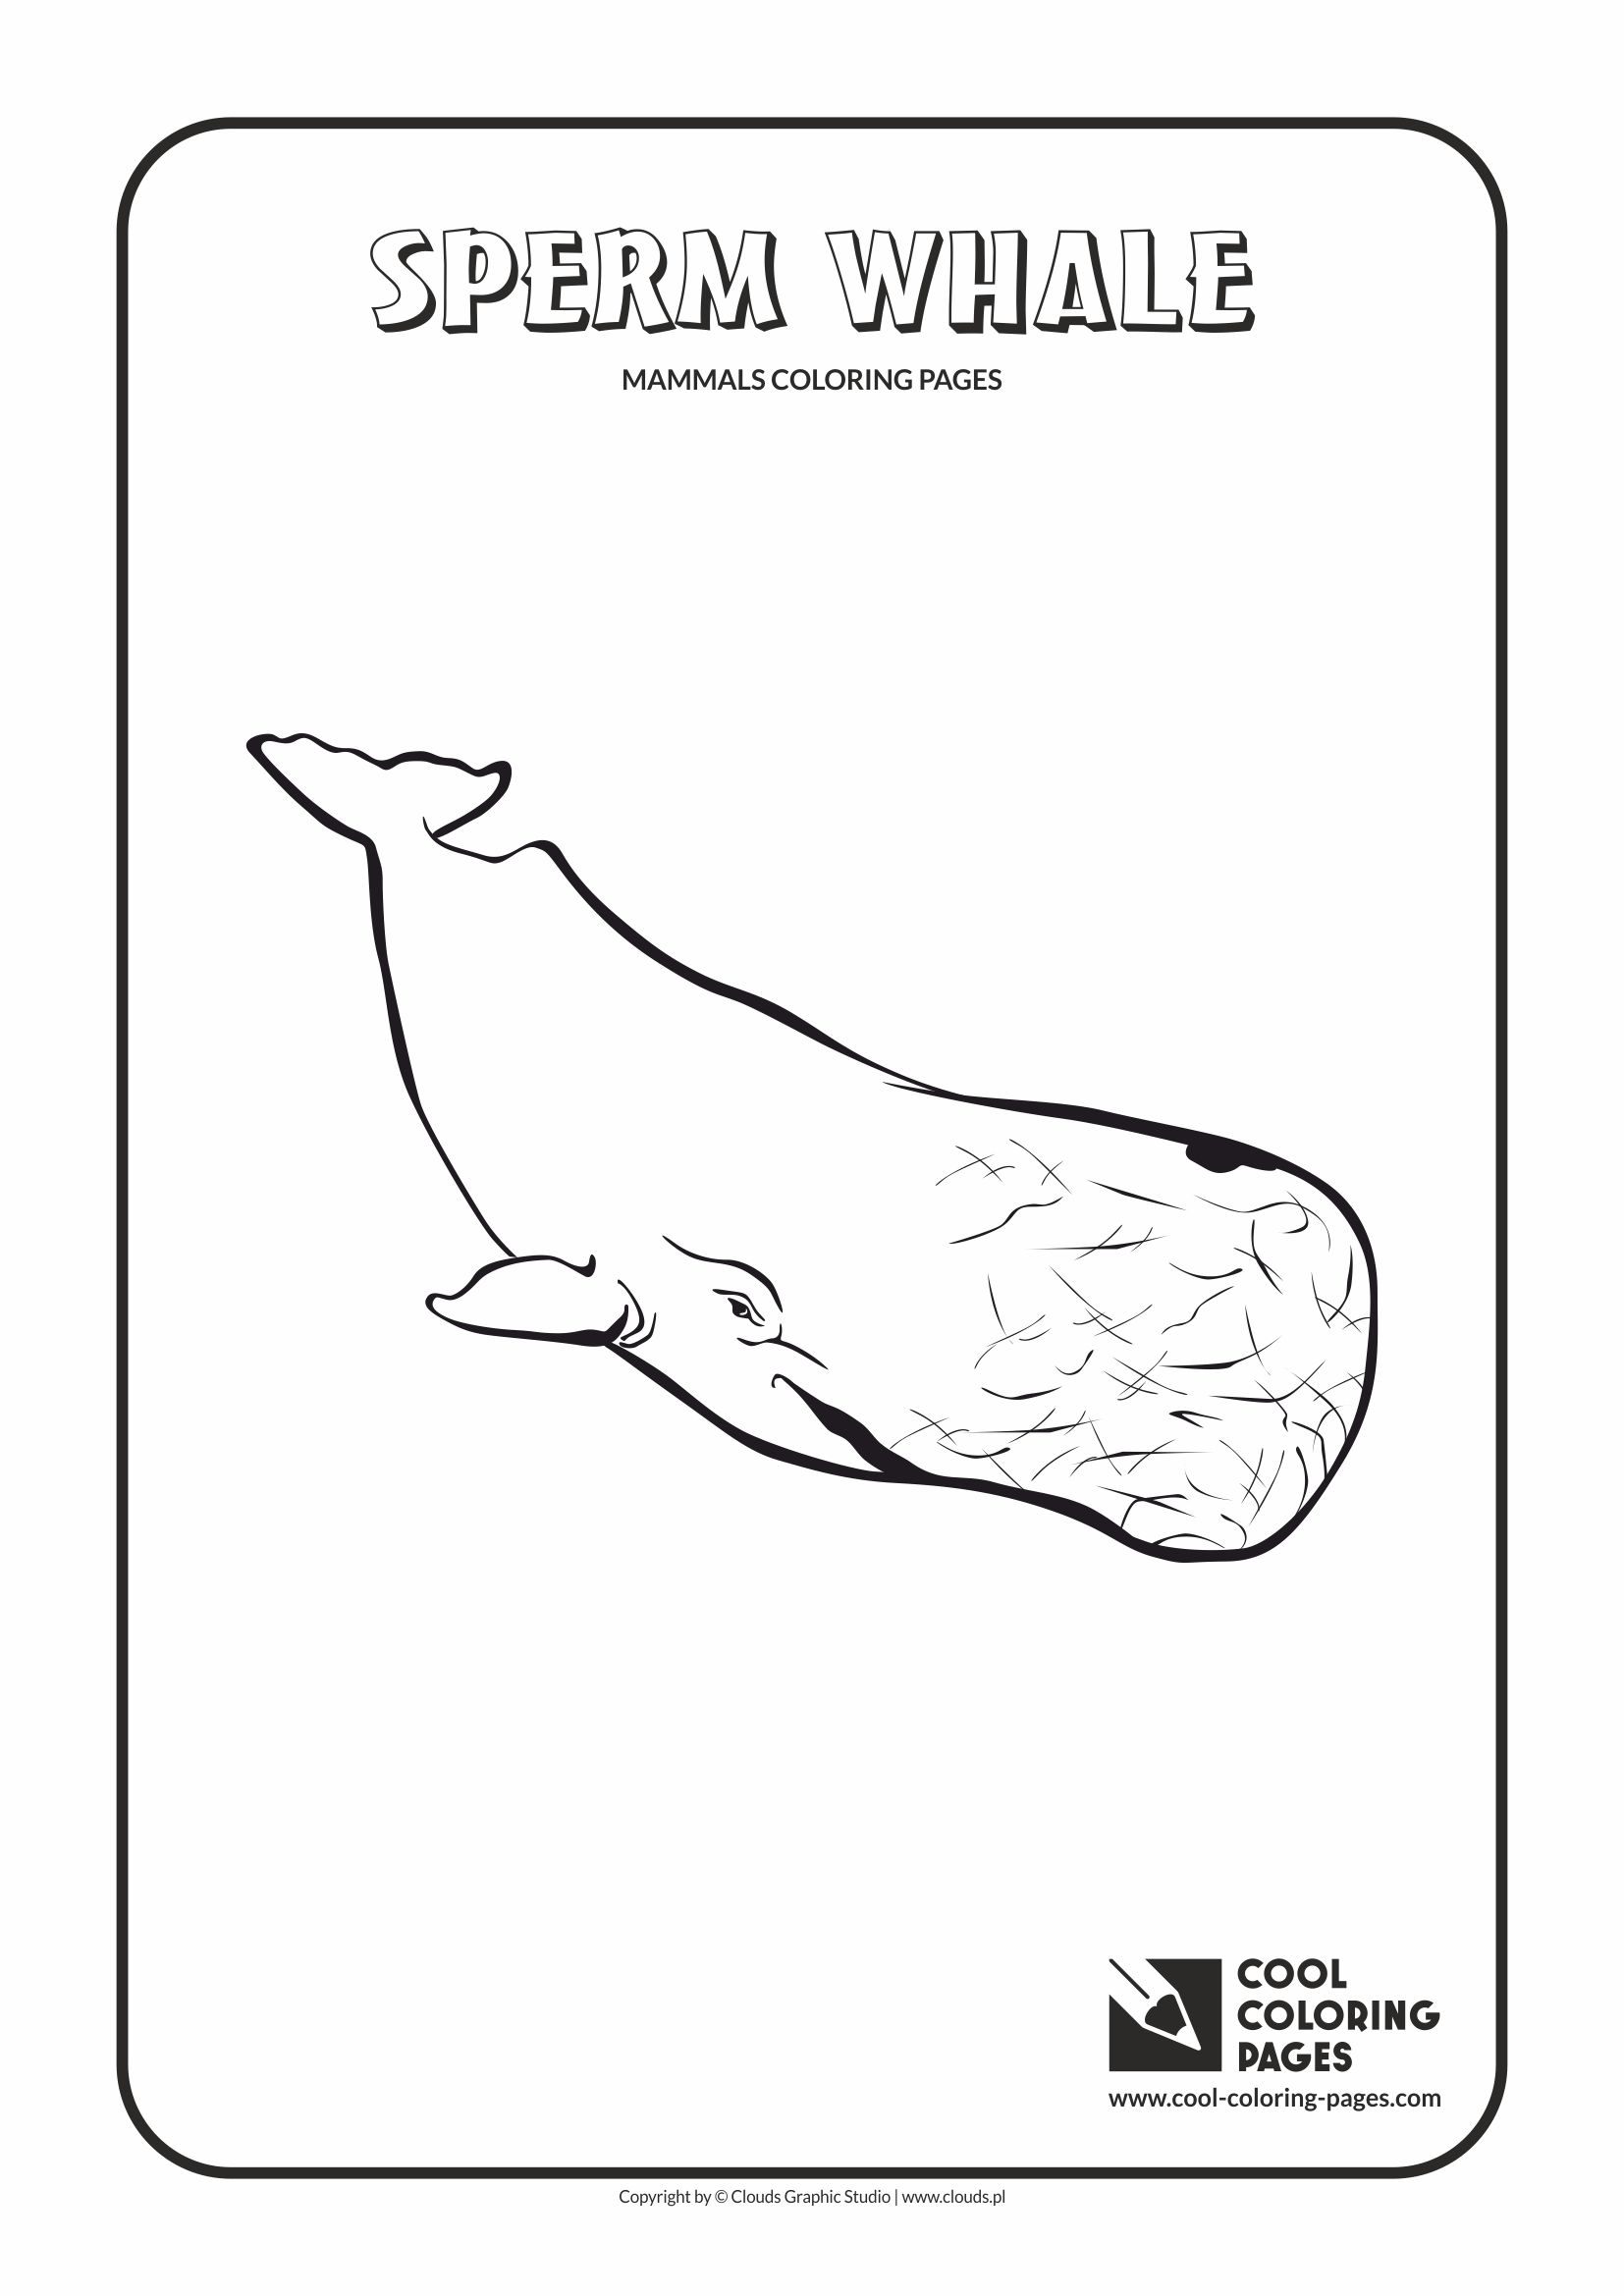 Cool Coloring Pages - Animals / Sperm whale / Coloring page with sperm whale